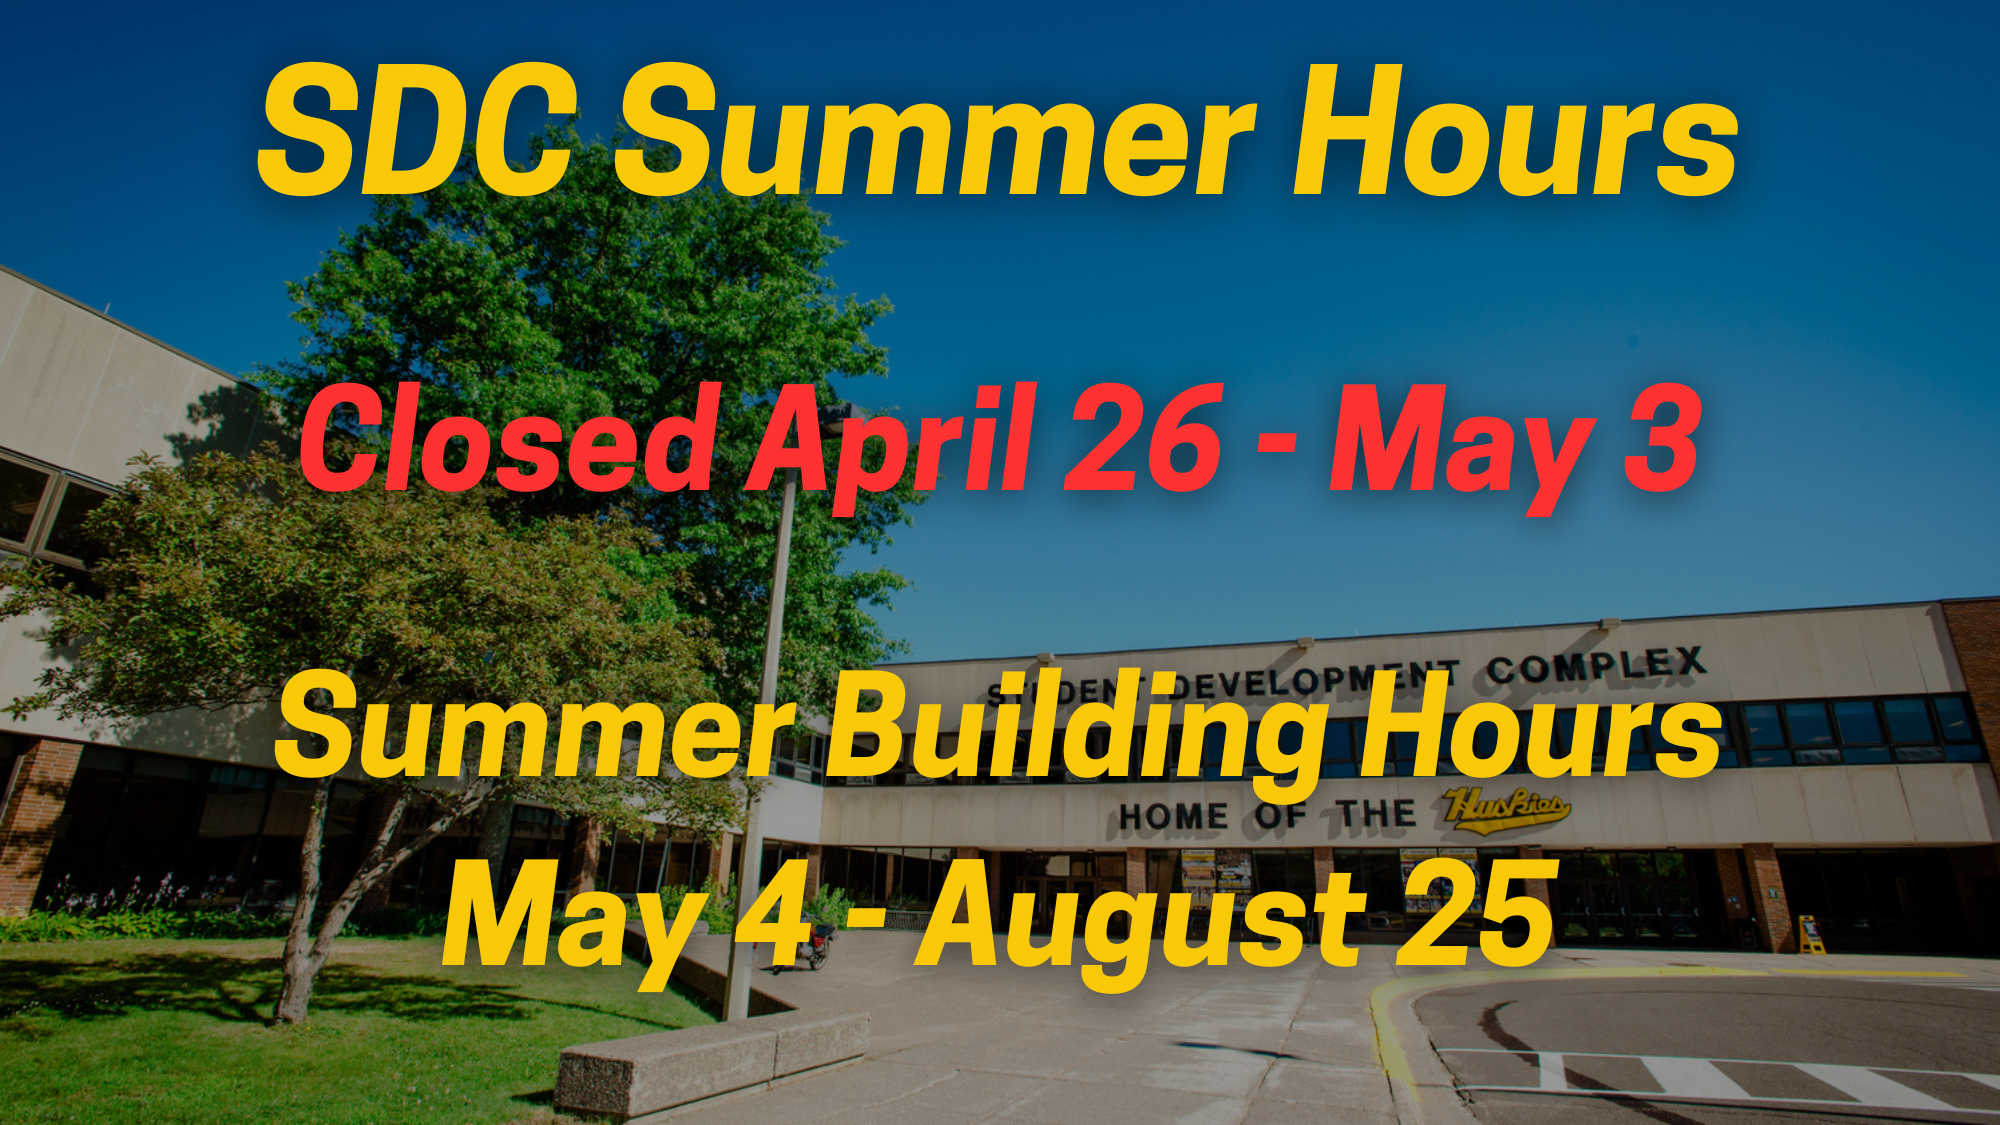 SDC Summer Hours
Closed April 26 - May 3
Summer Building Hours May 4 - August 25